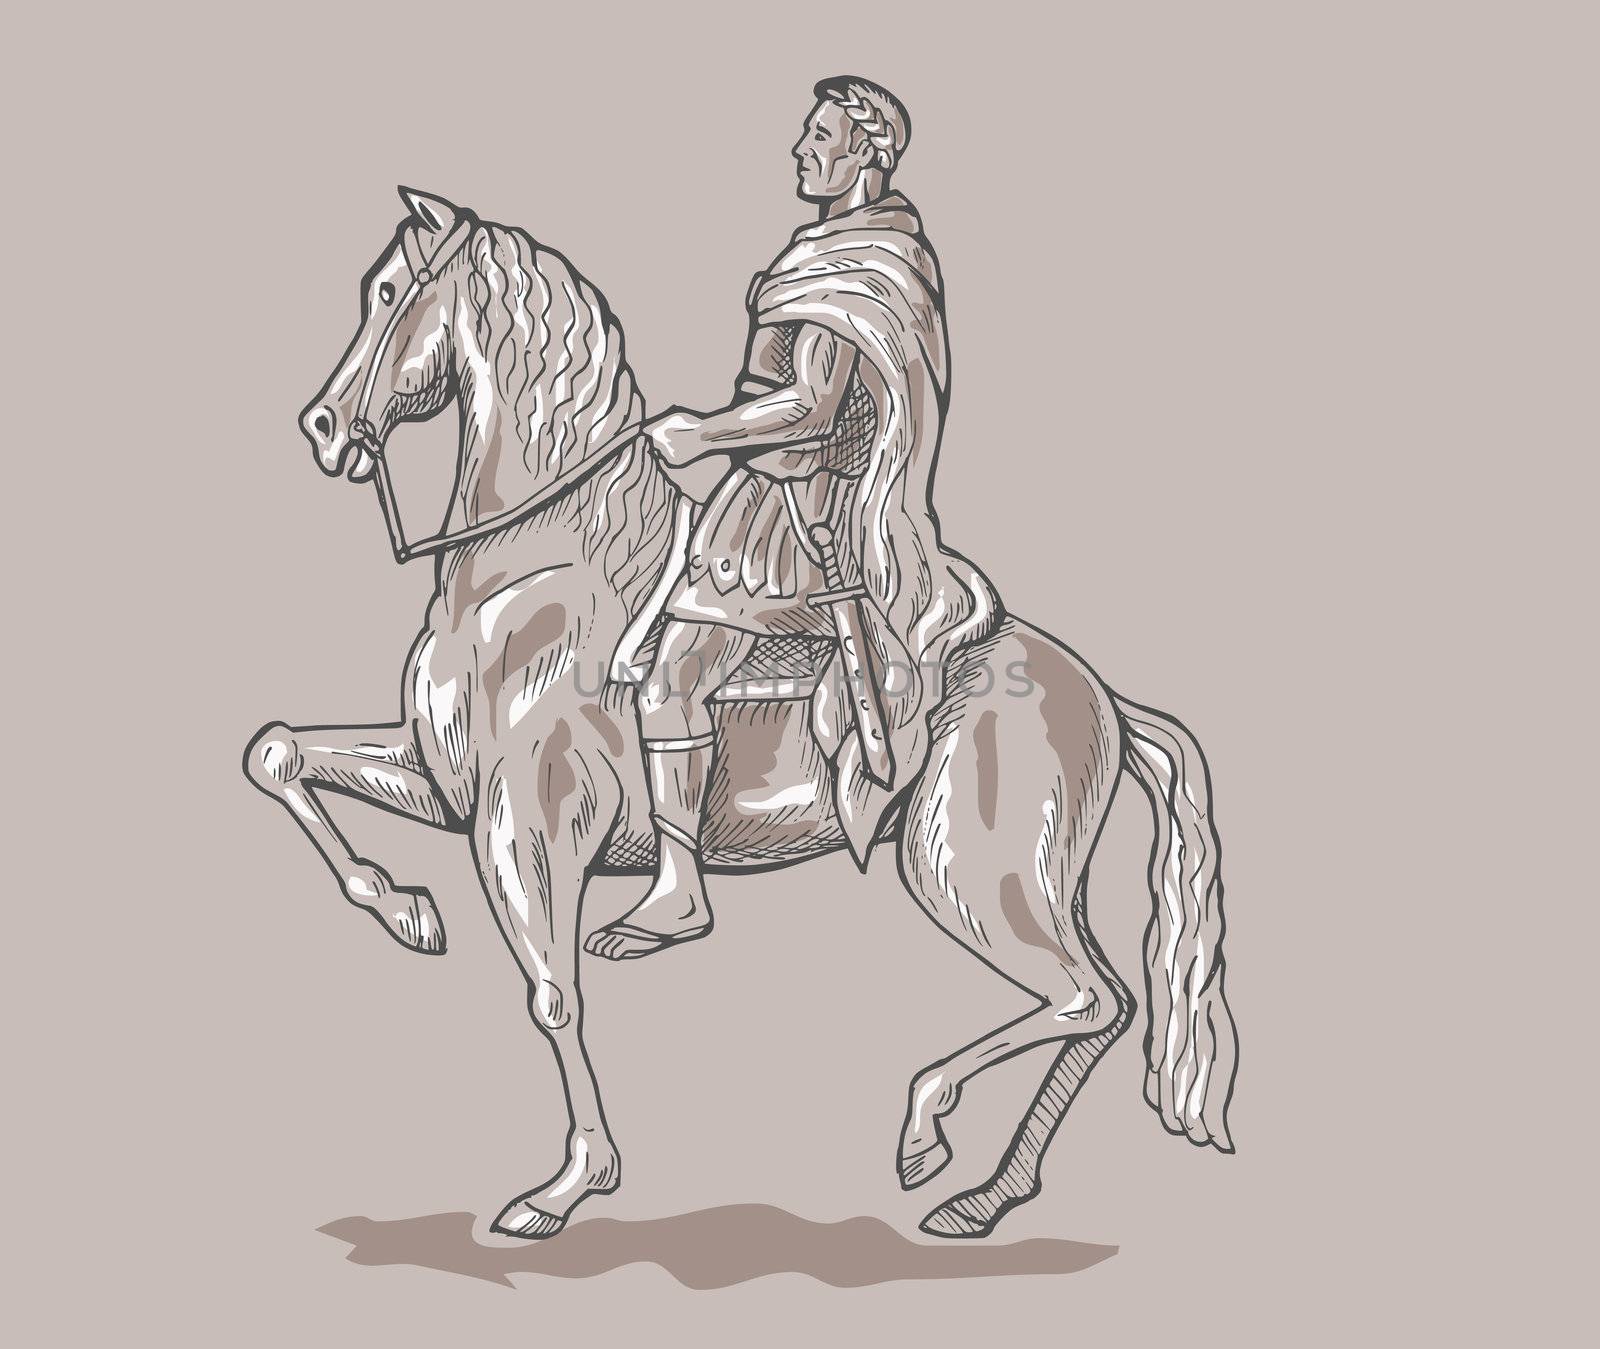 hand sketched, drawn vector illustration of a Roman emperor soldier riding horse.